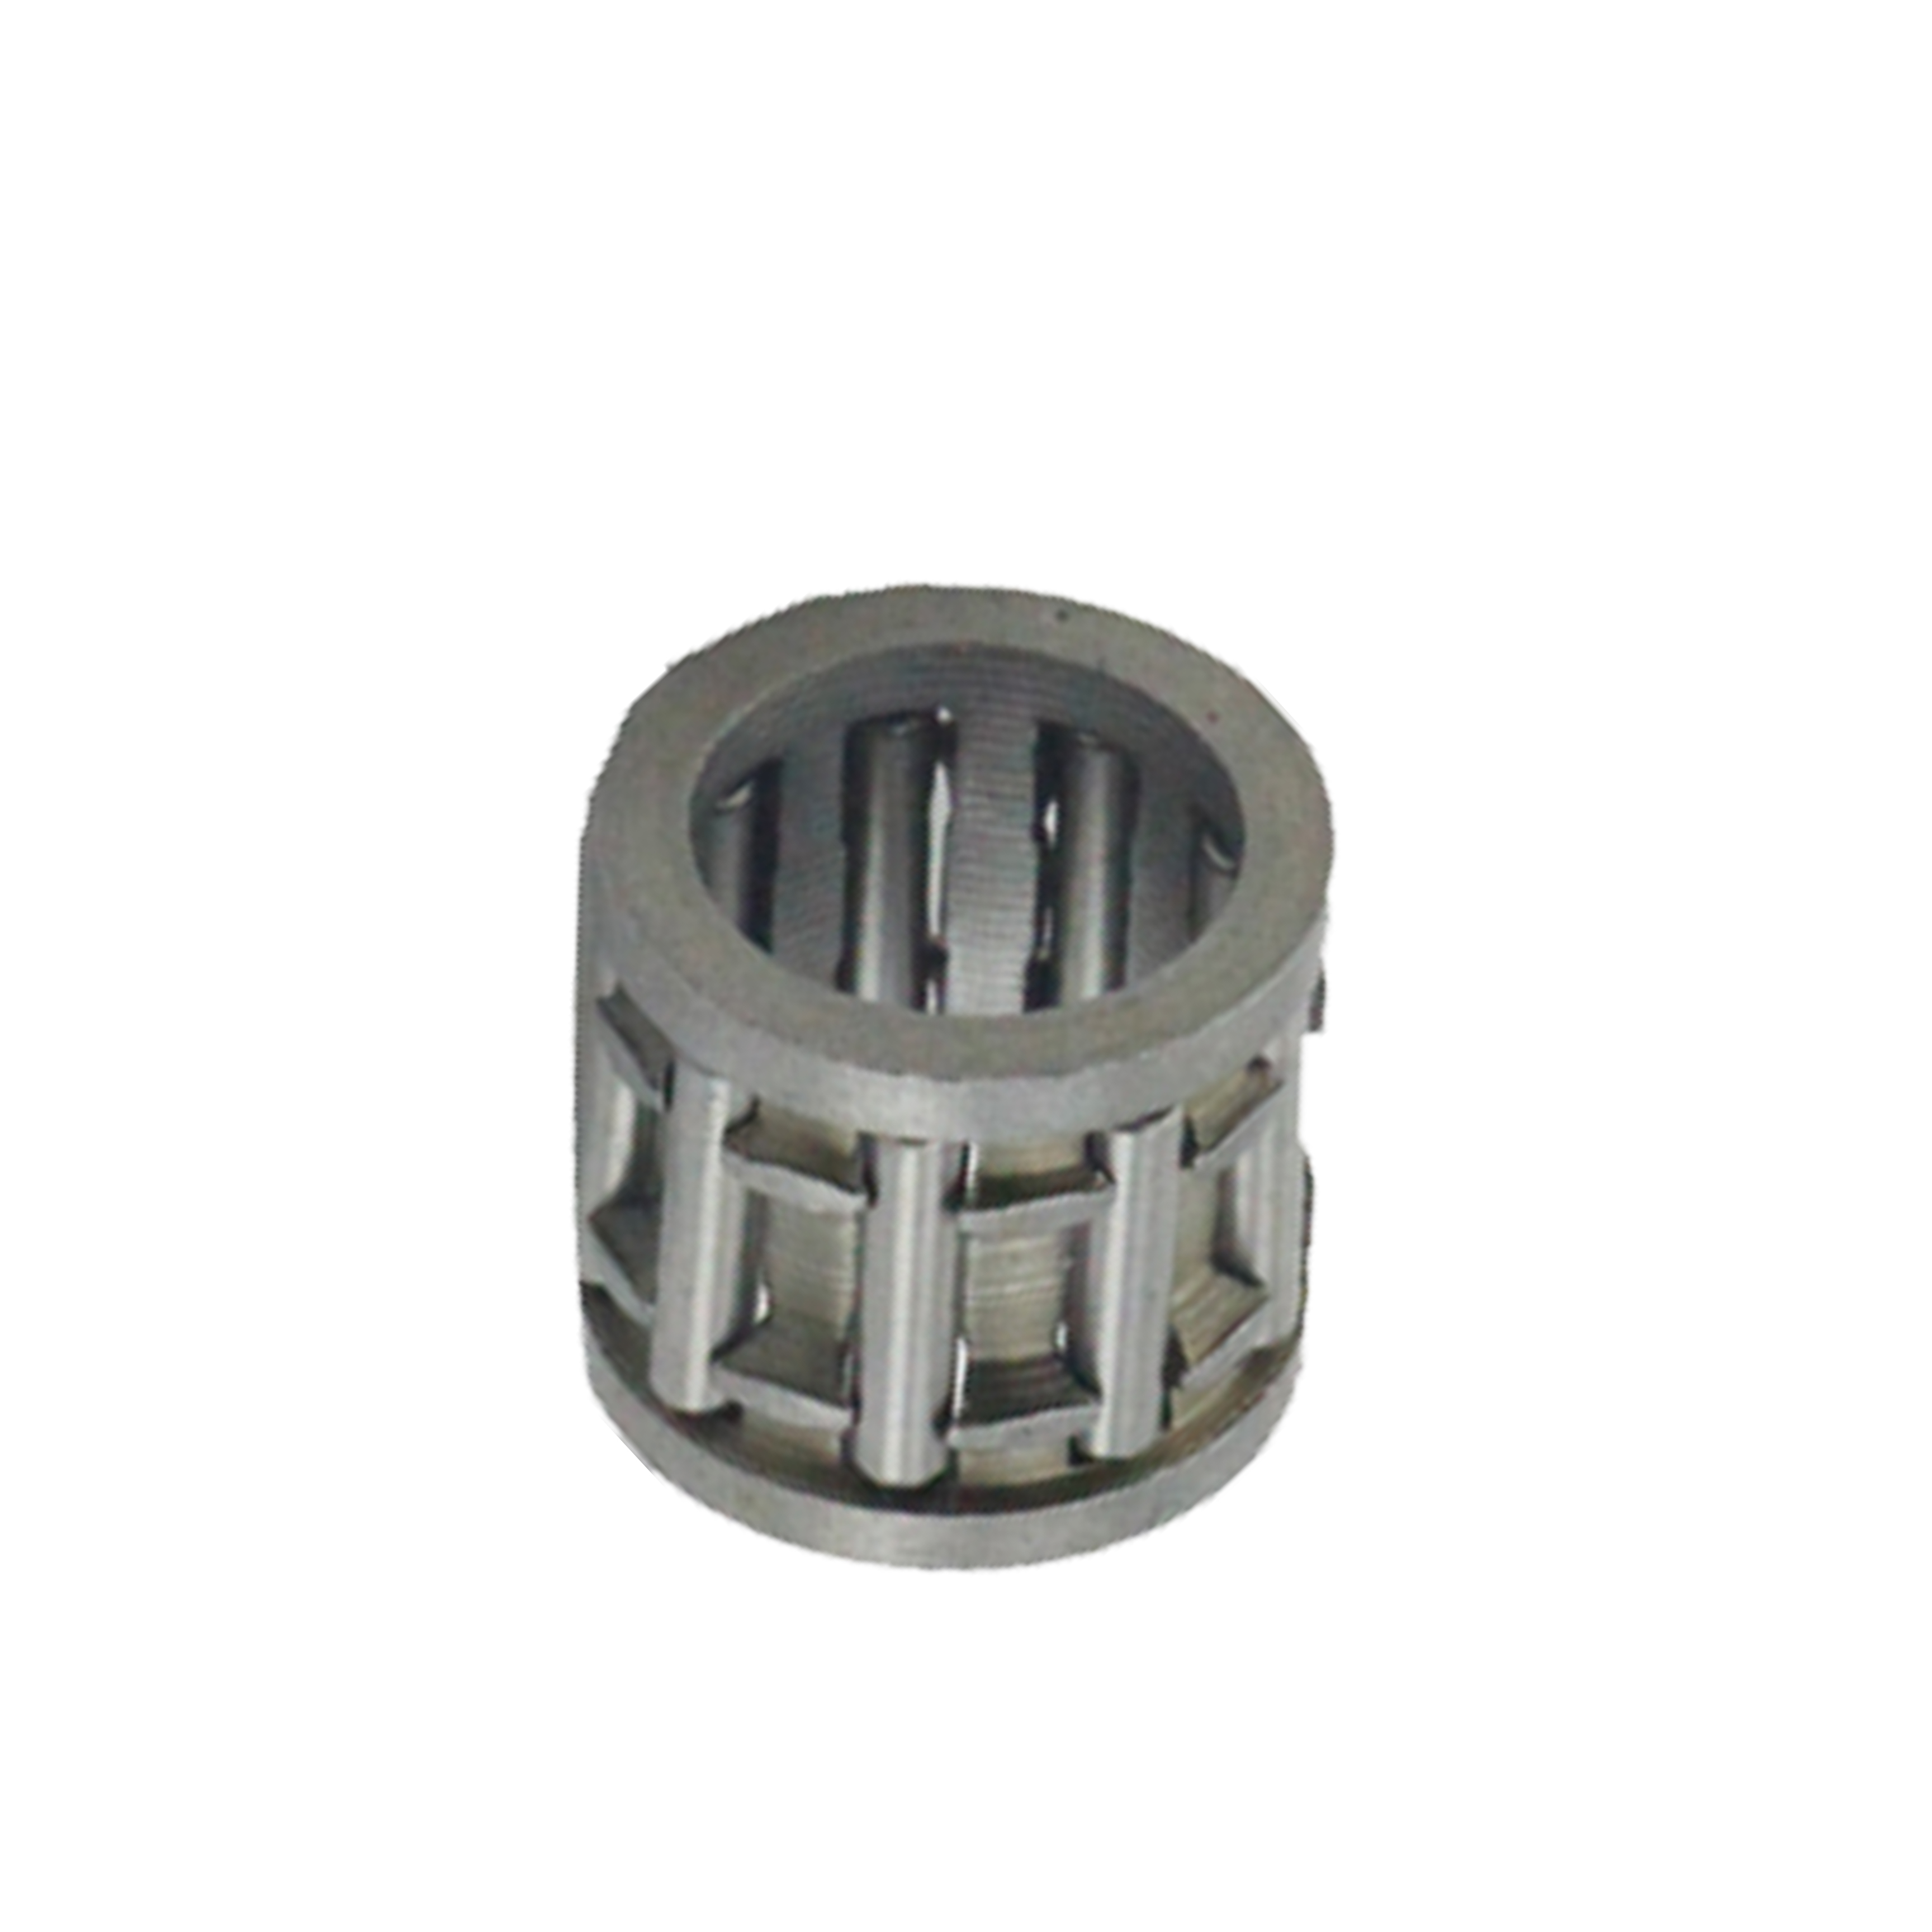 Genuine Super High Quality Aftermarket Stihl 064 MS640 066 MS660 MS650 Chainsaw Cylinder Piston Bearing Needle Cage 12x17x13 OEM 9512 003 3281